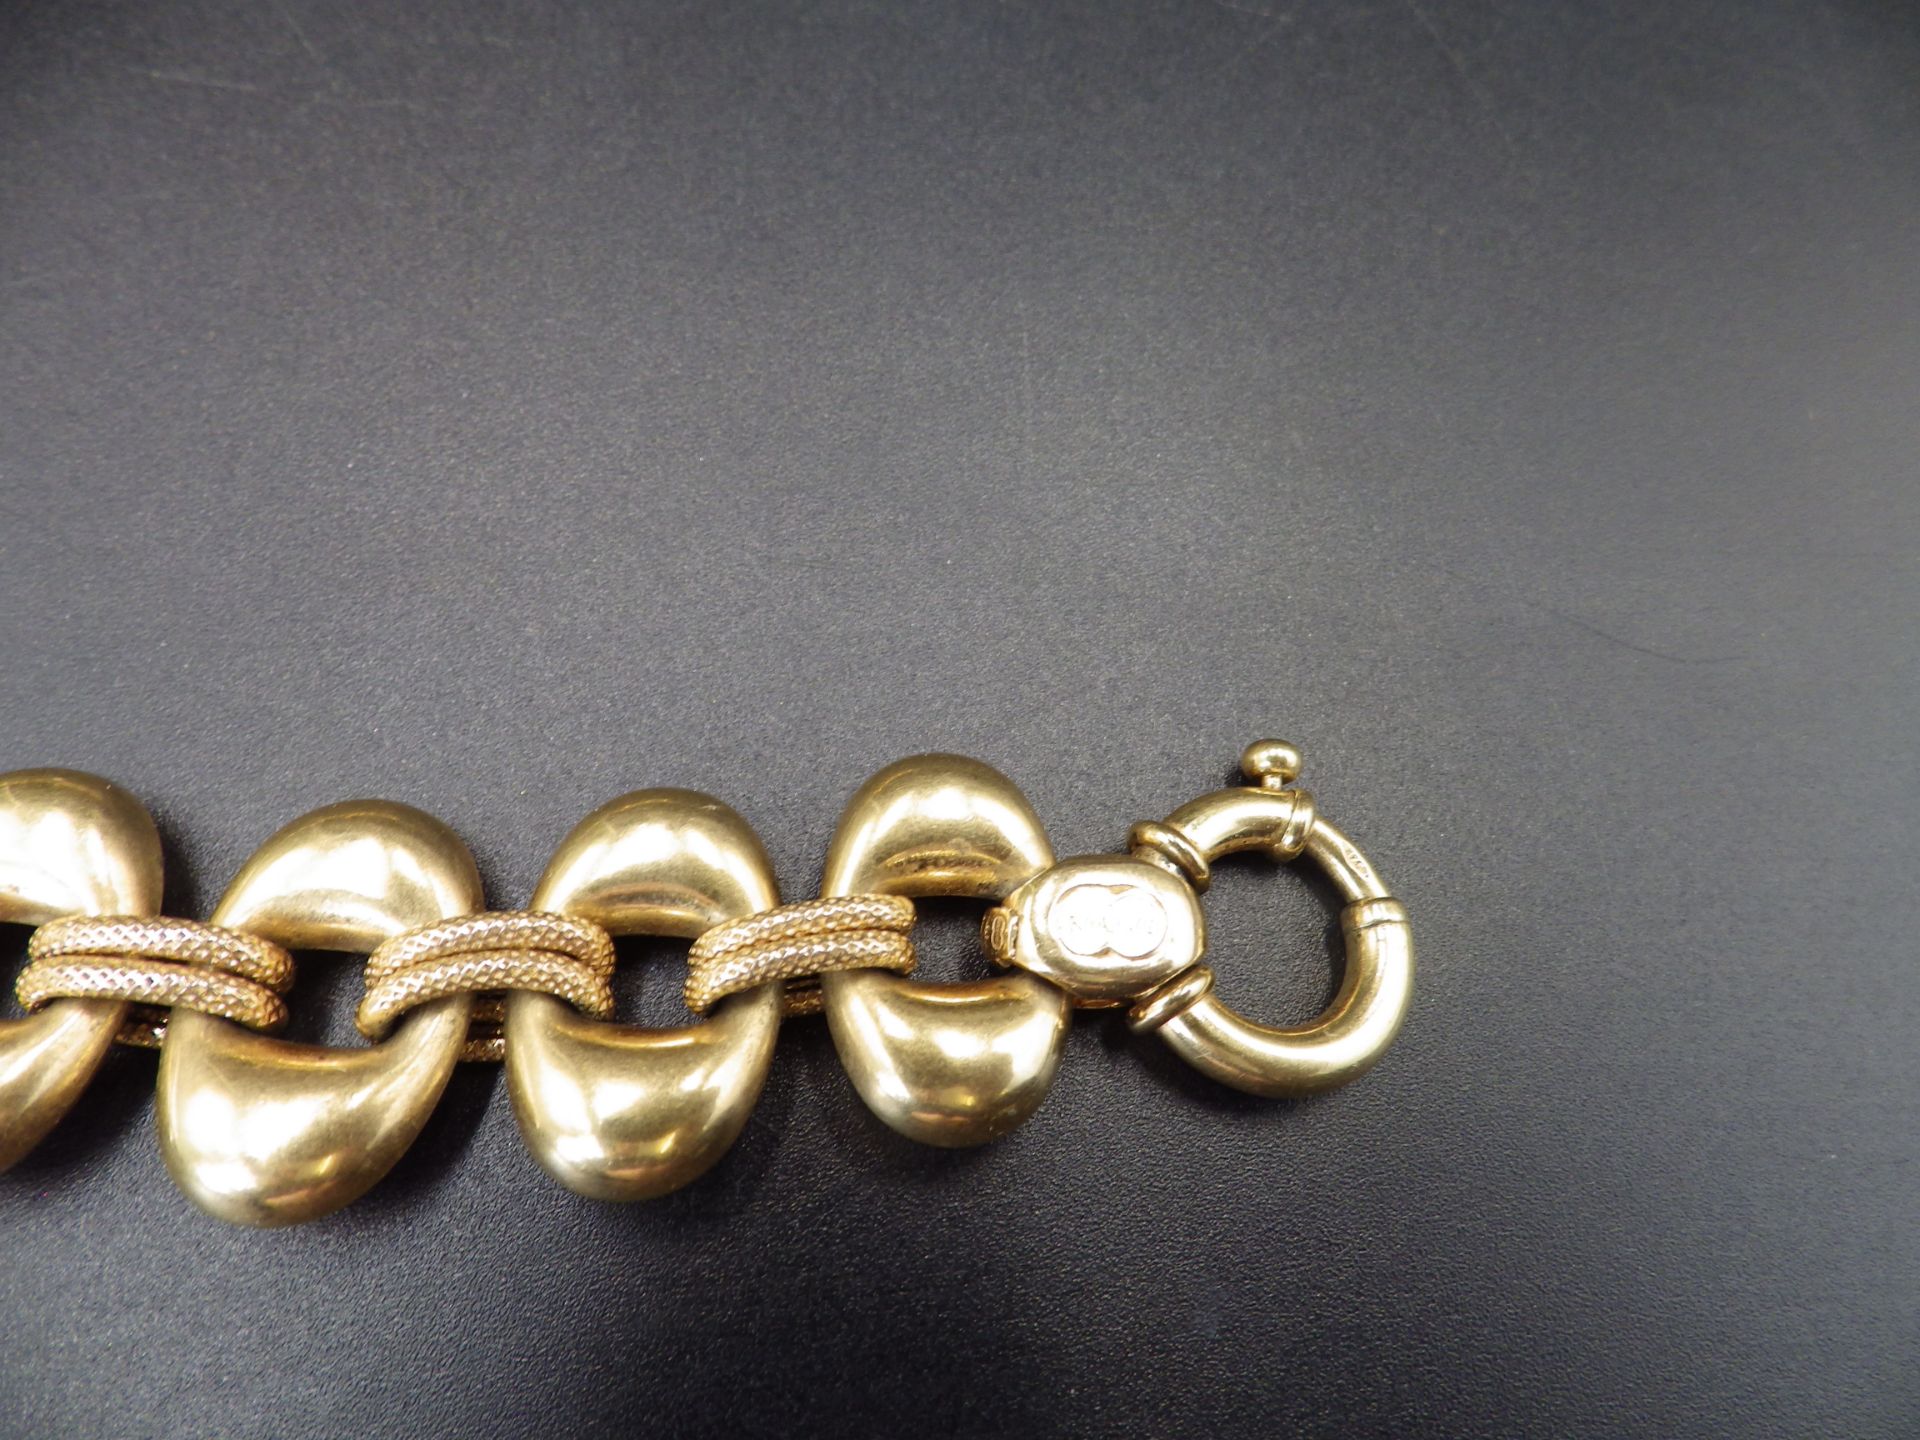 9ct Itailian gold chain by 'Unoaerre' 45cm in length and 48.60g total weight. - Image 4 of 4